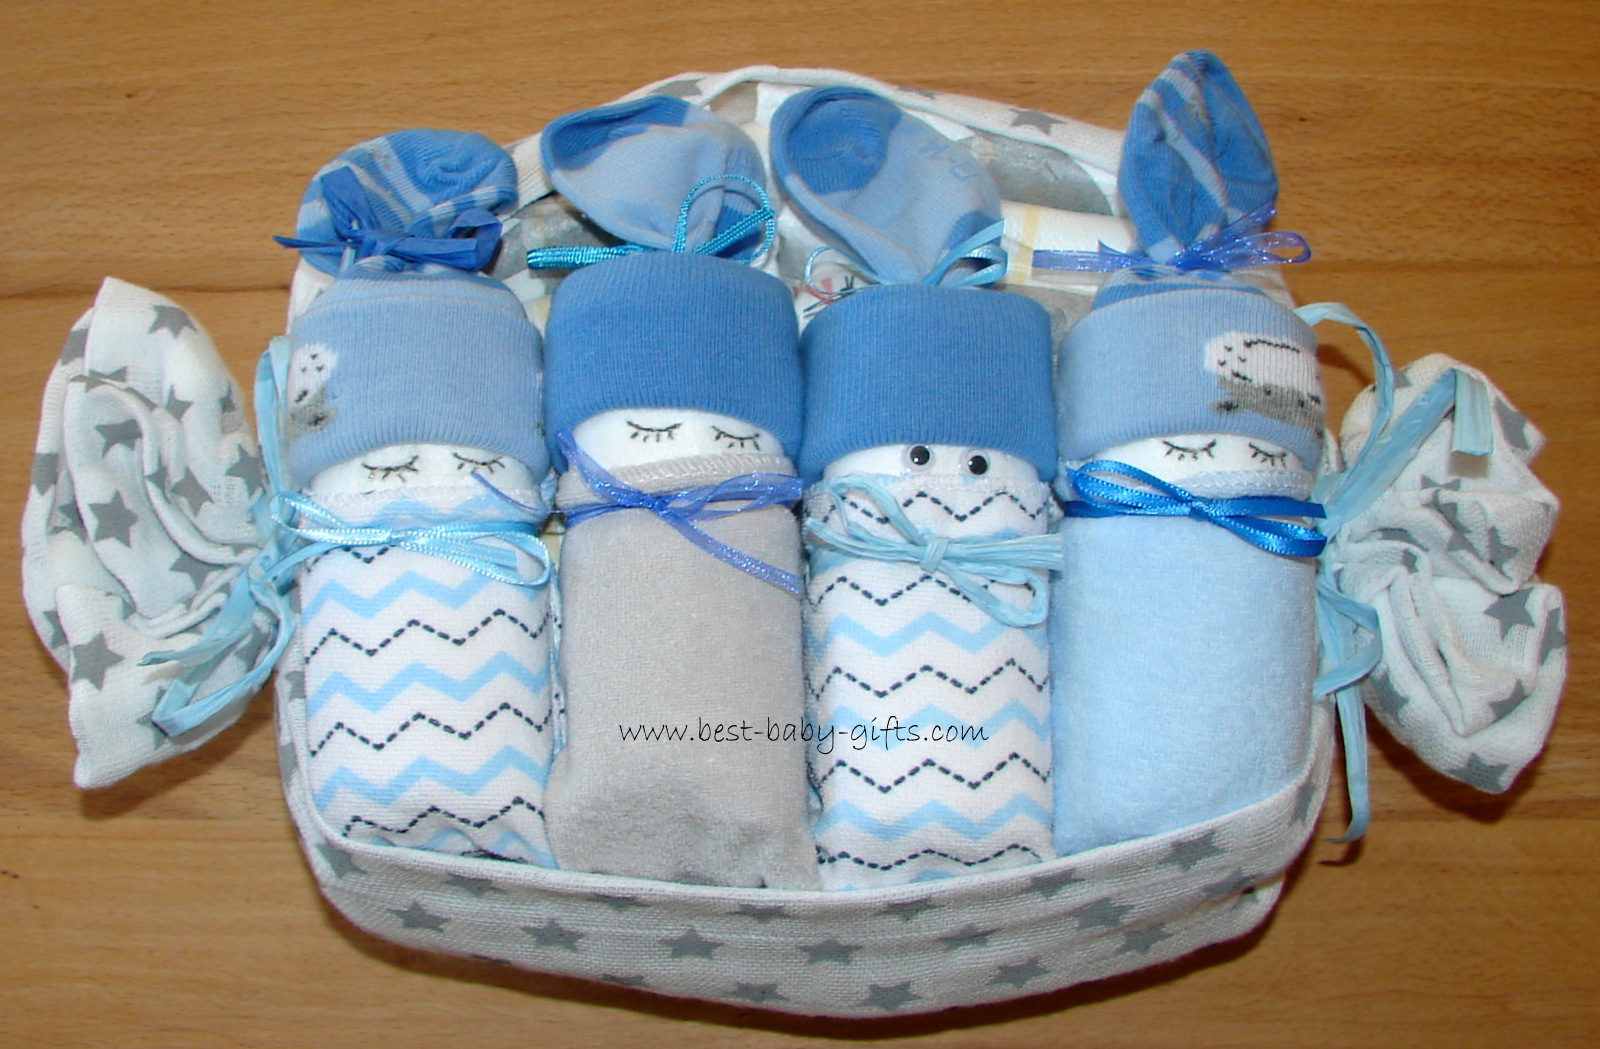 4 blue baby diapers made from organic baby socks and washcloths wrapped in an eco-friendly white burp cloth with gray stars